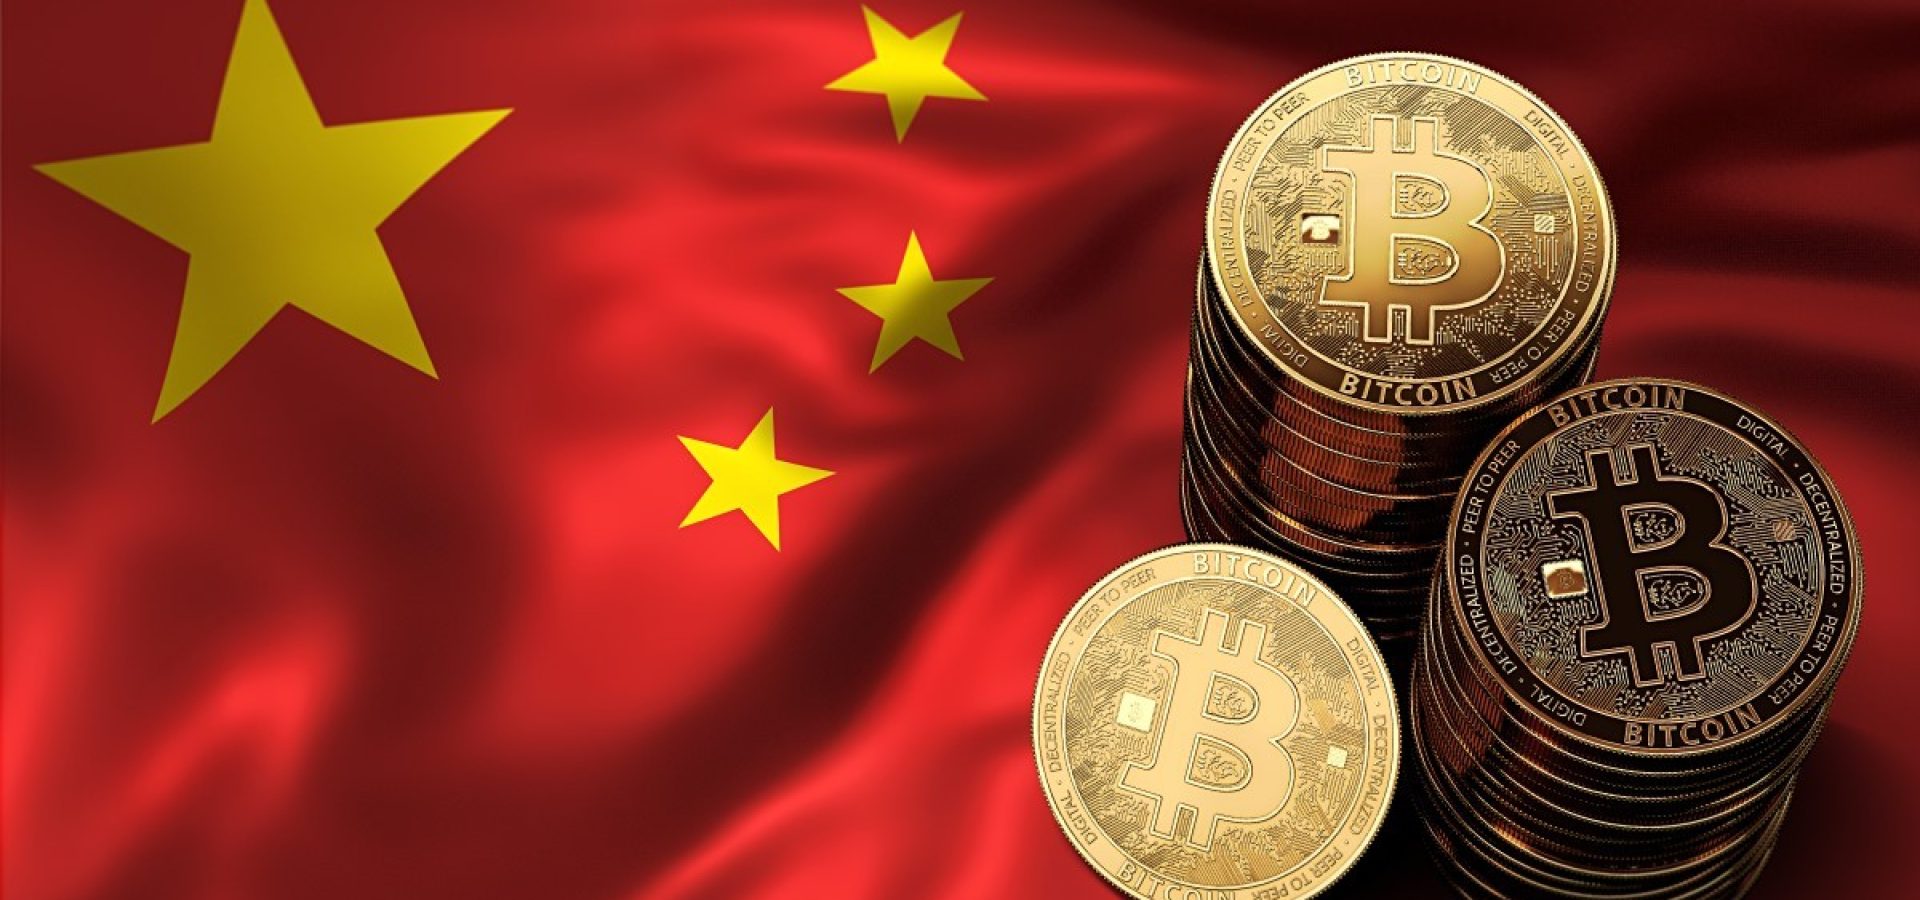 Crypto industry in China